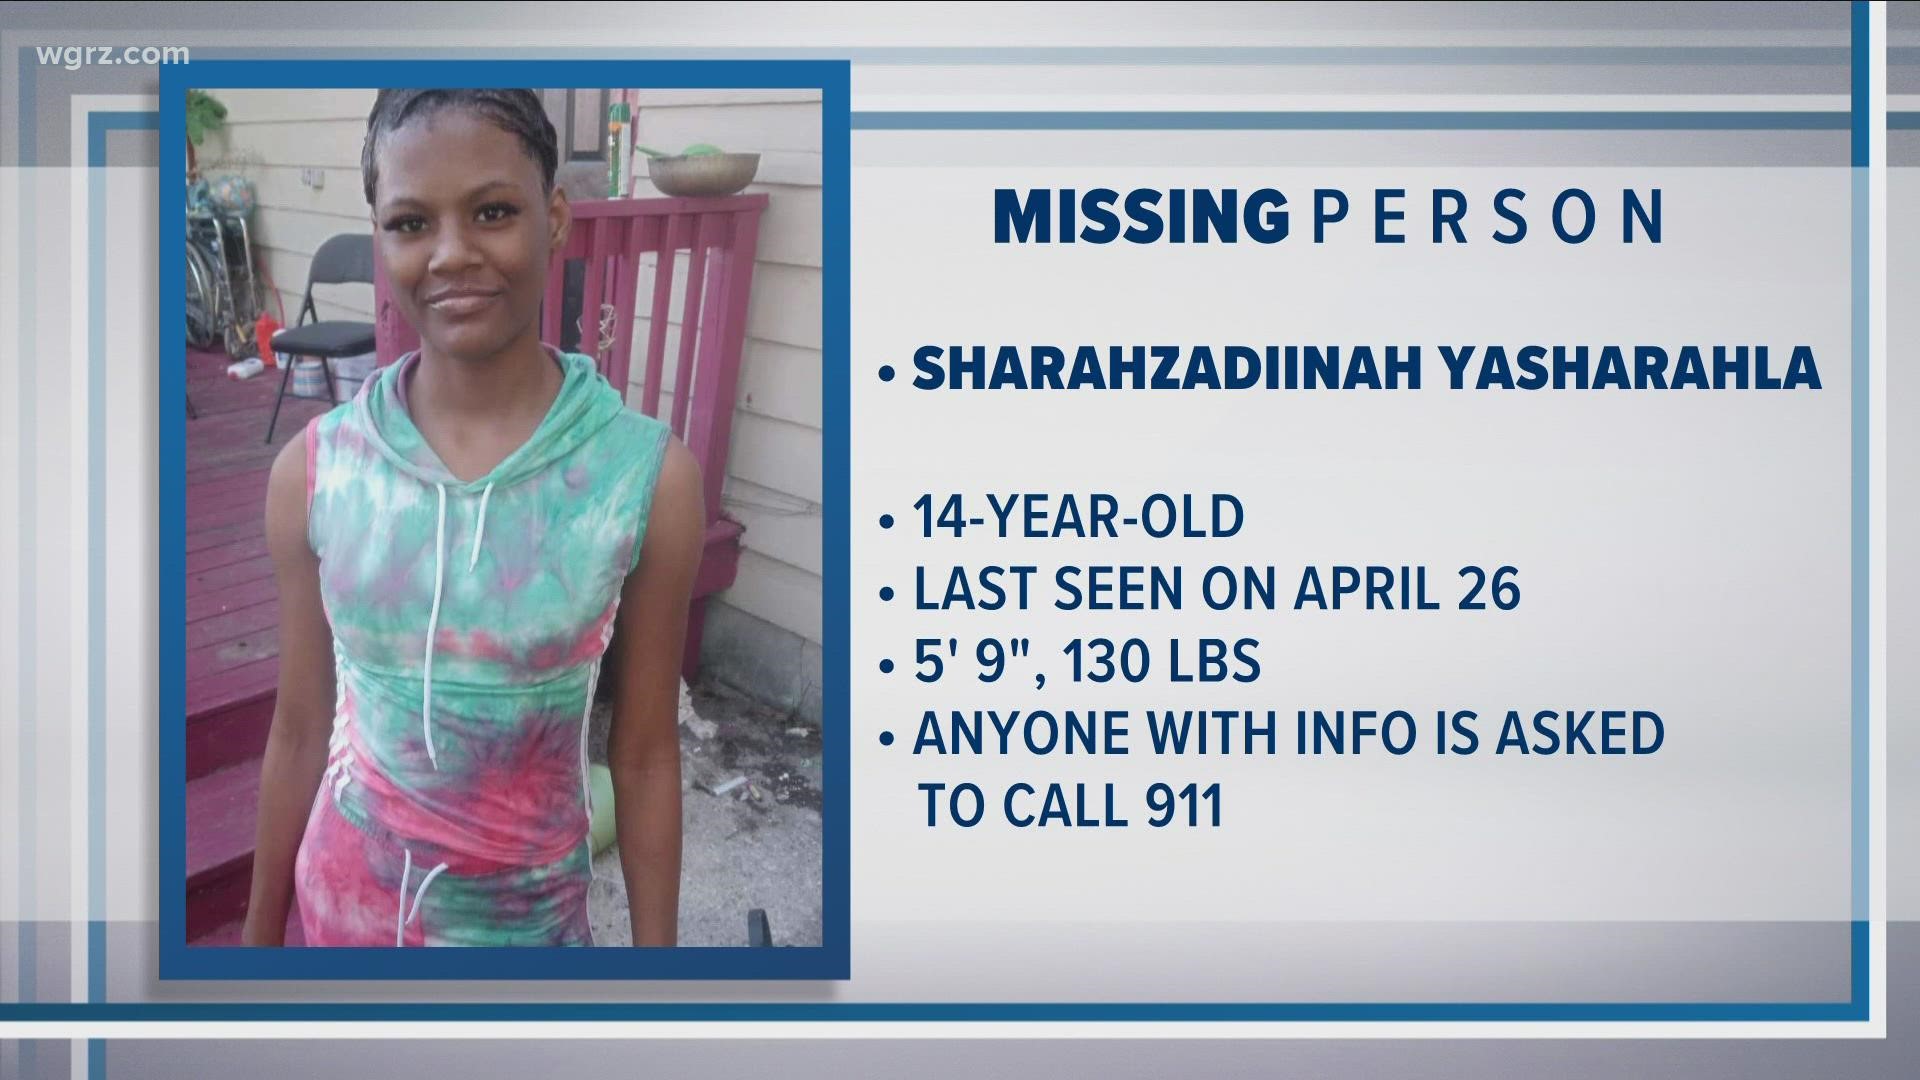 Police are asking for your help in finding 14-year-old Sharahzandiinah Yasharahla, who was last seen April 26th, on High Street in the city of Buffalo.